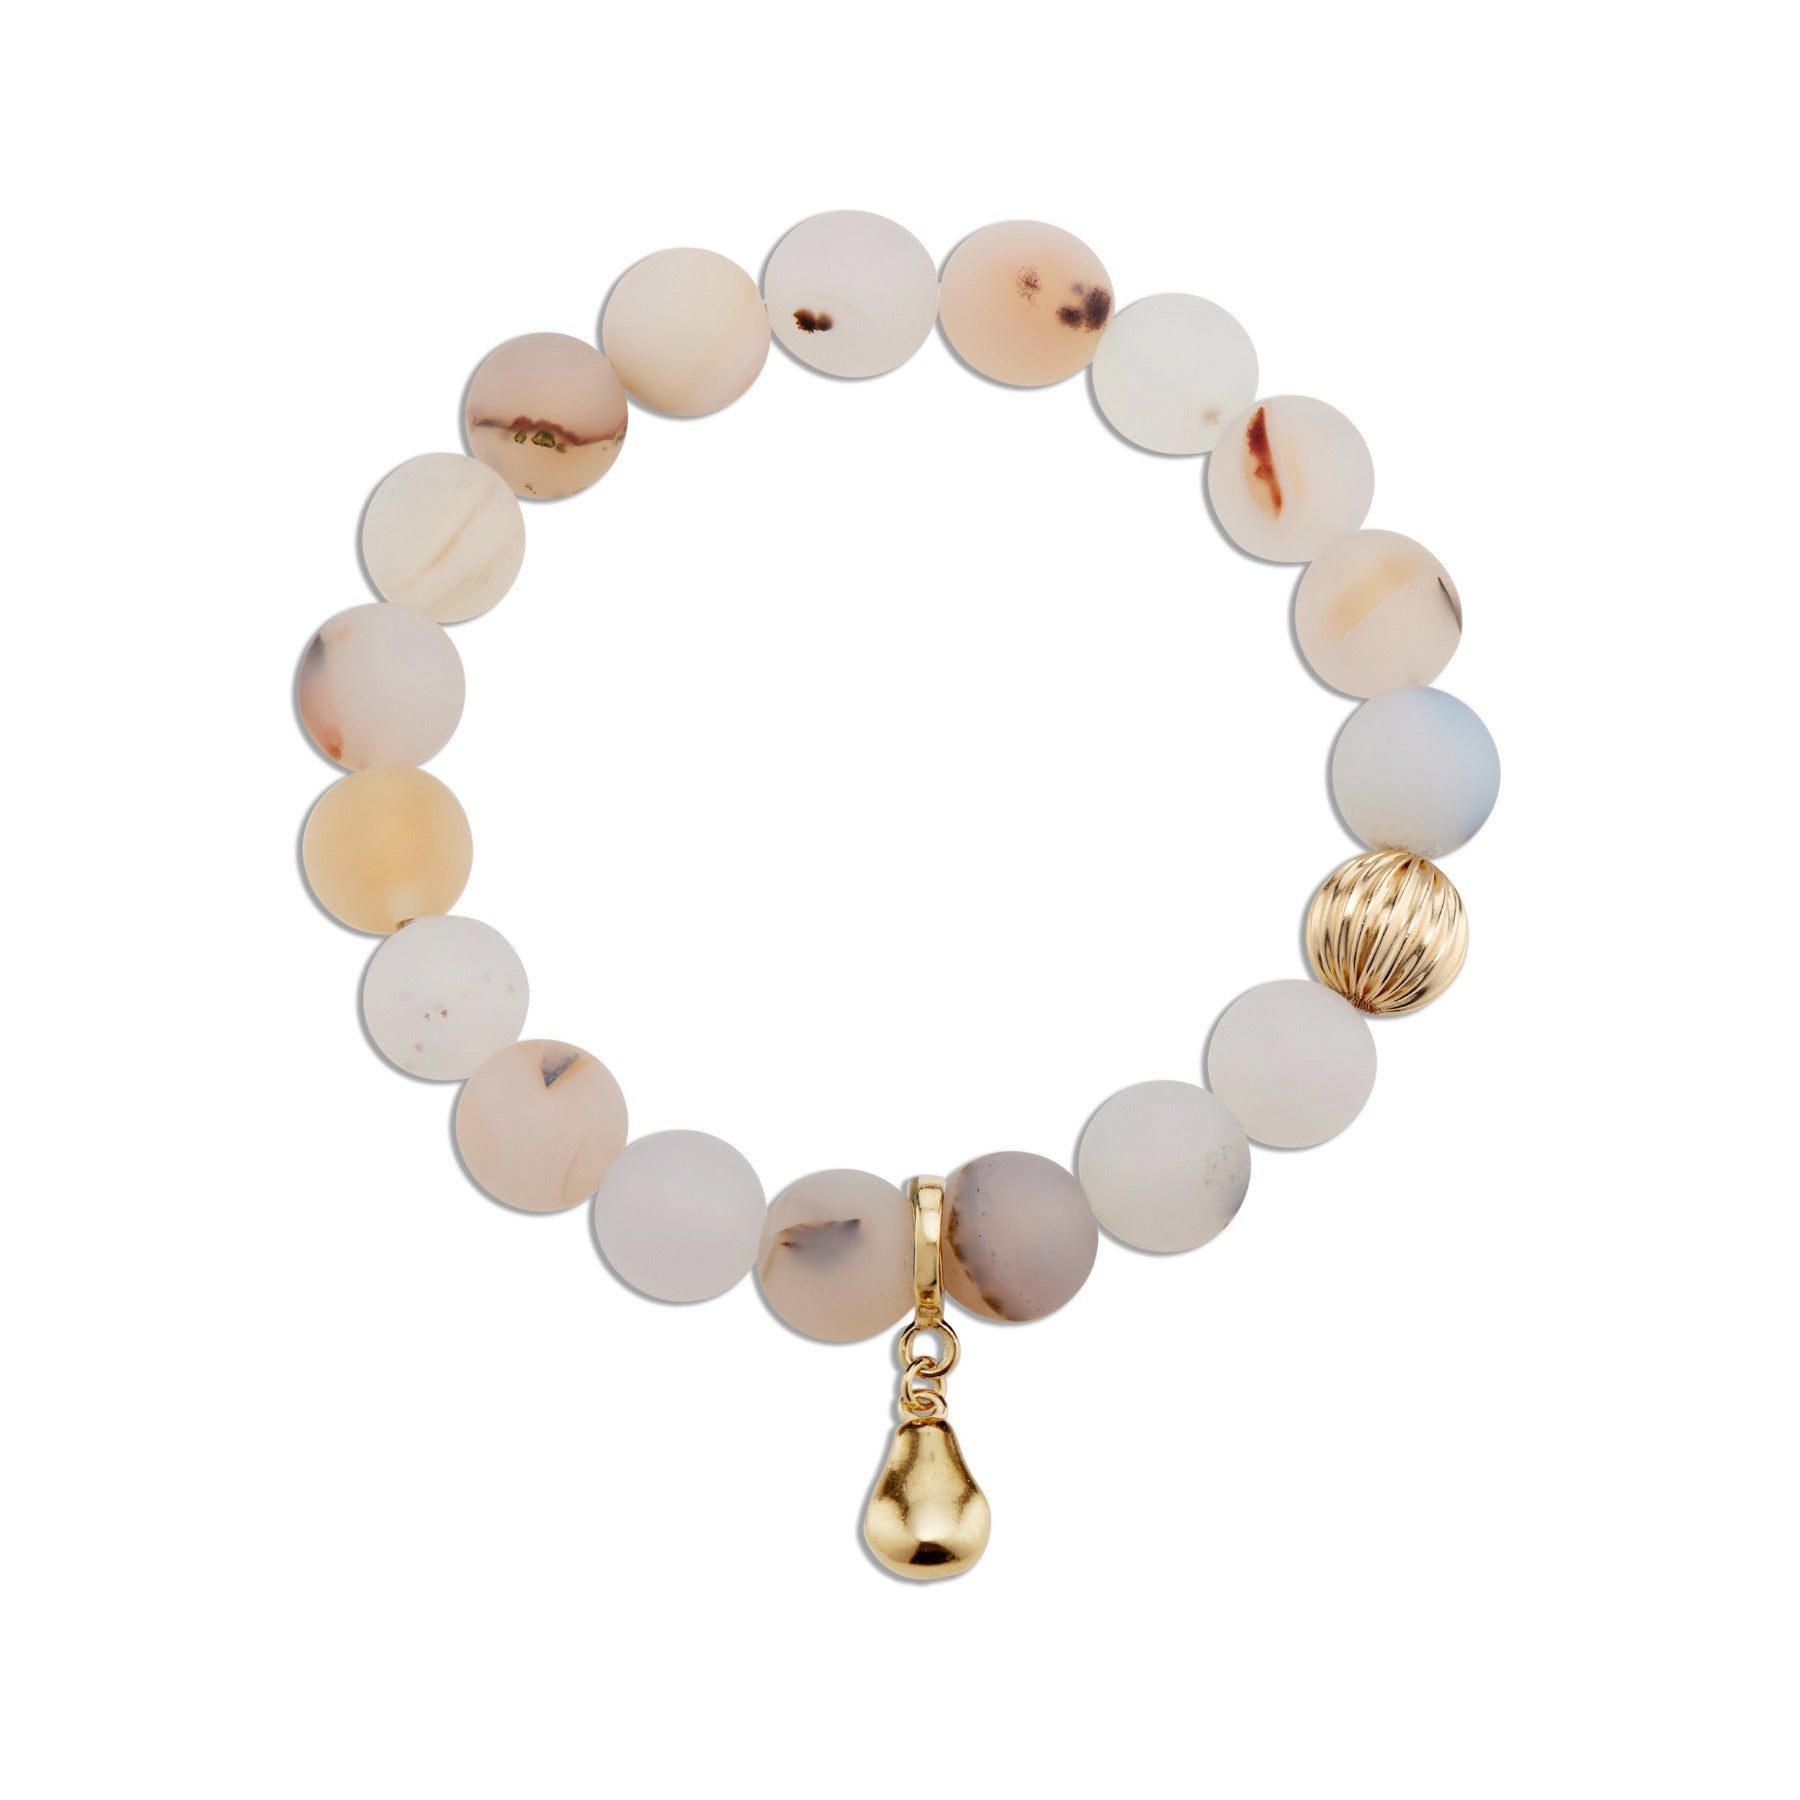 Montana agate crystal smooth gemstone elastic bracelet with 14k gold corrugated bead and pear charm.